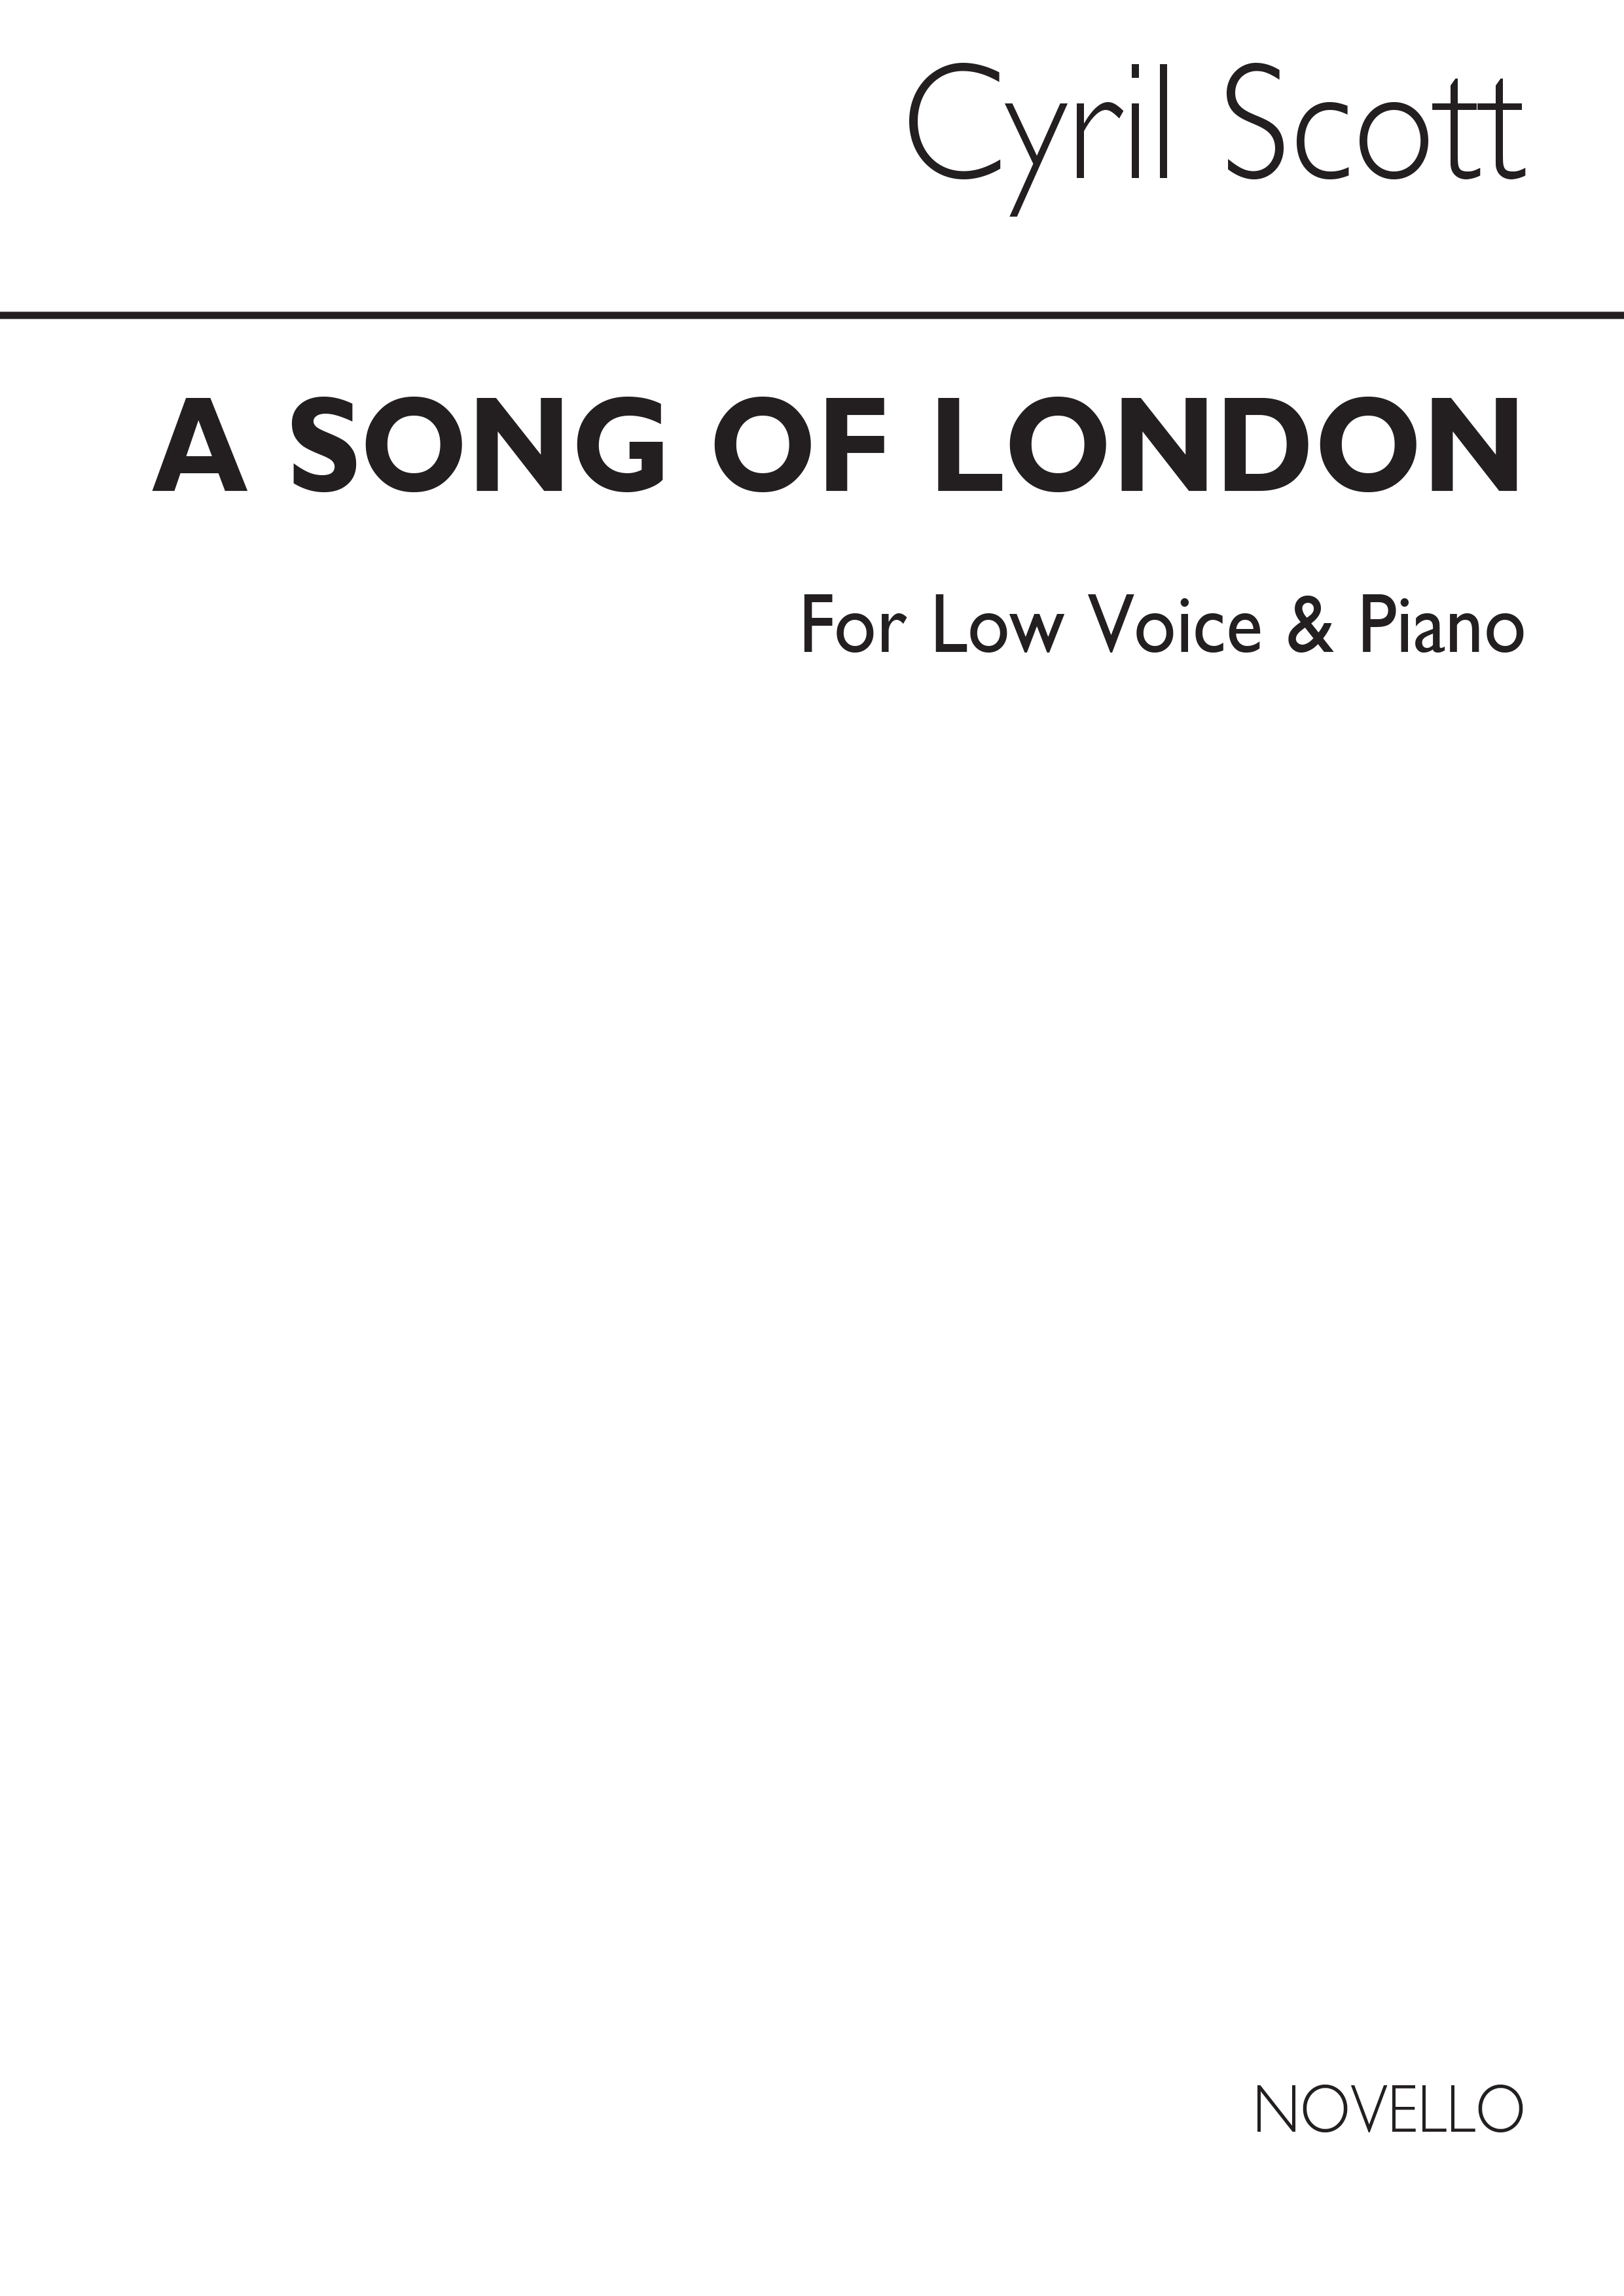 Cyril Scott: A Song Of London Op52 No.1 (Key-e Minor): Low Voice: Vocal Work